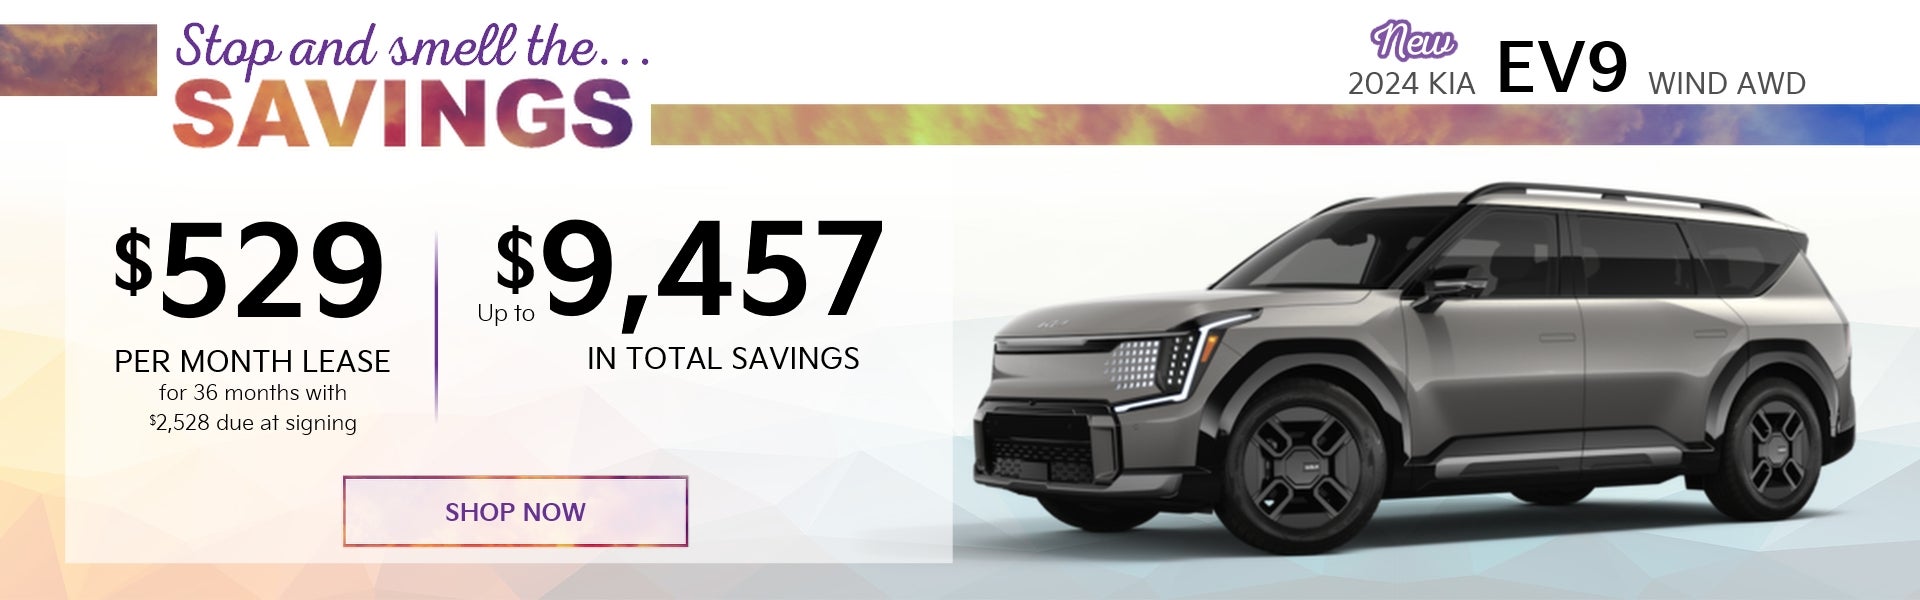 Stop and smell the savings on a new 2024 Kia EV9 Wind AWD!